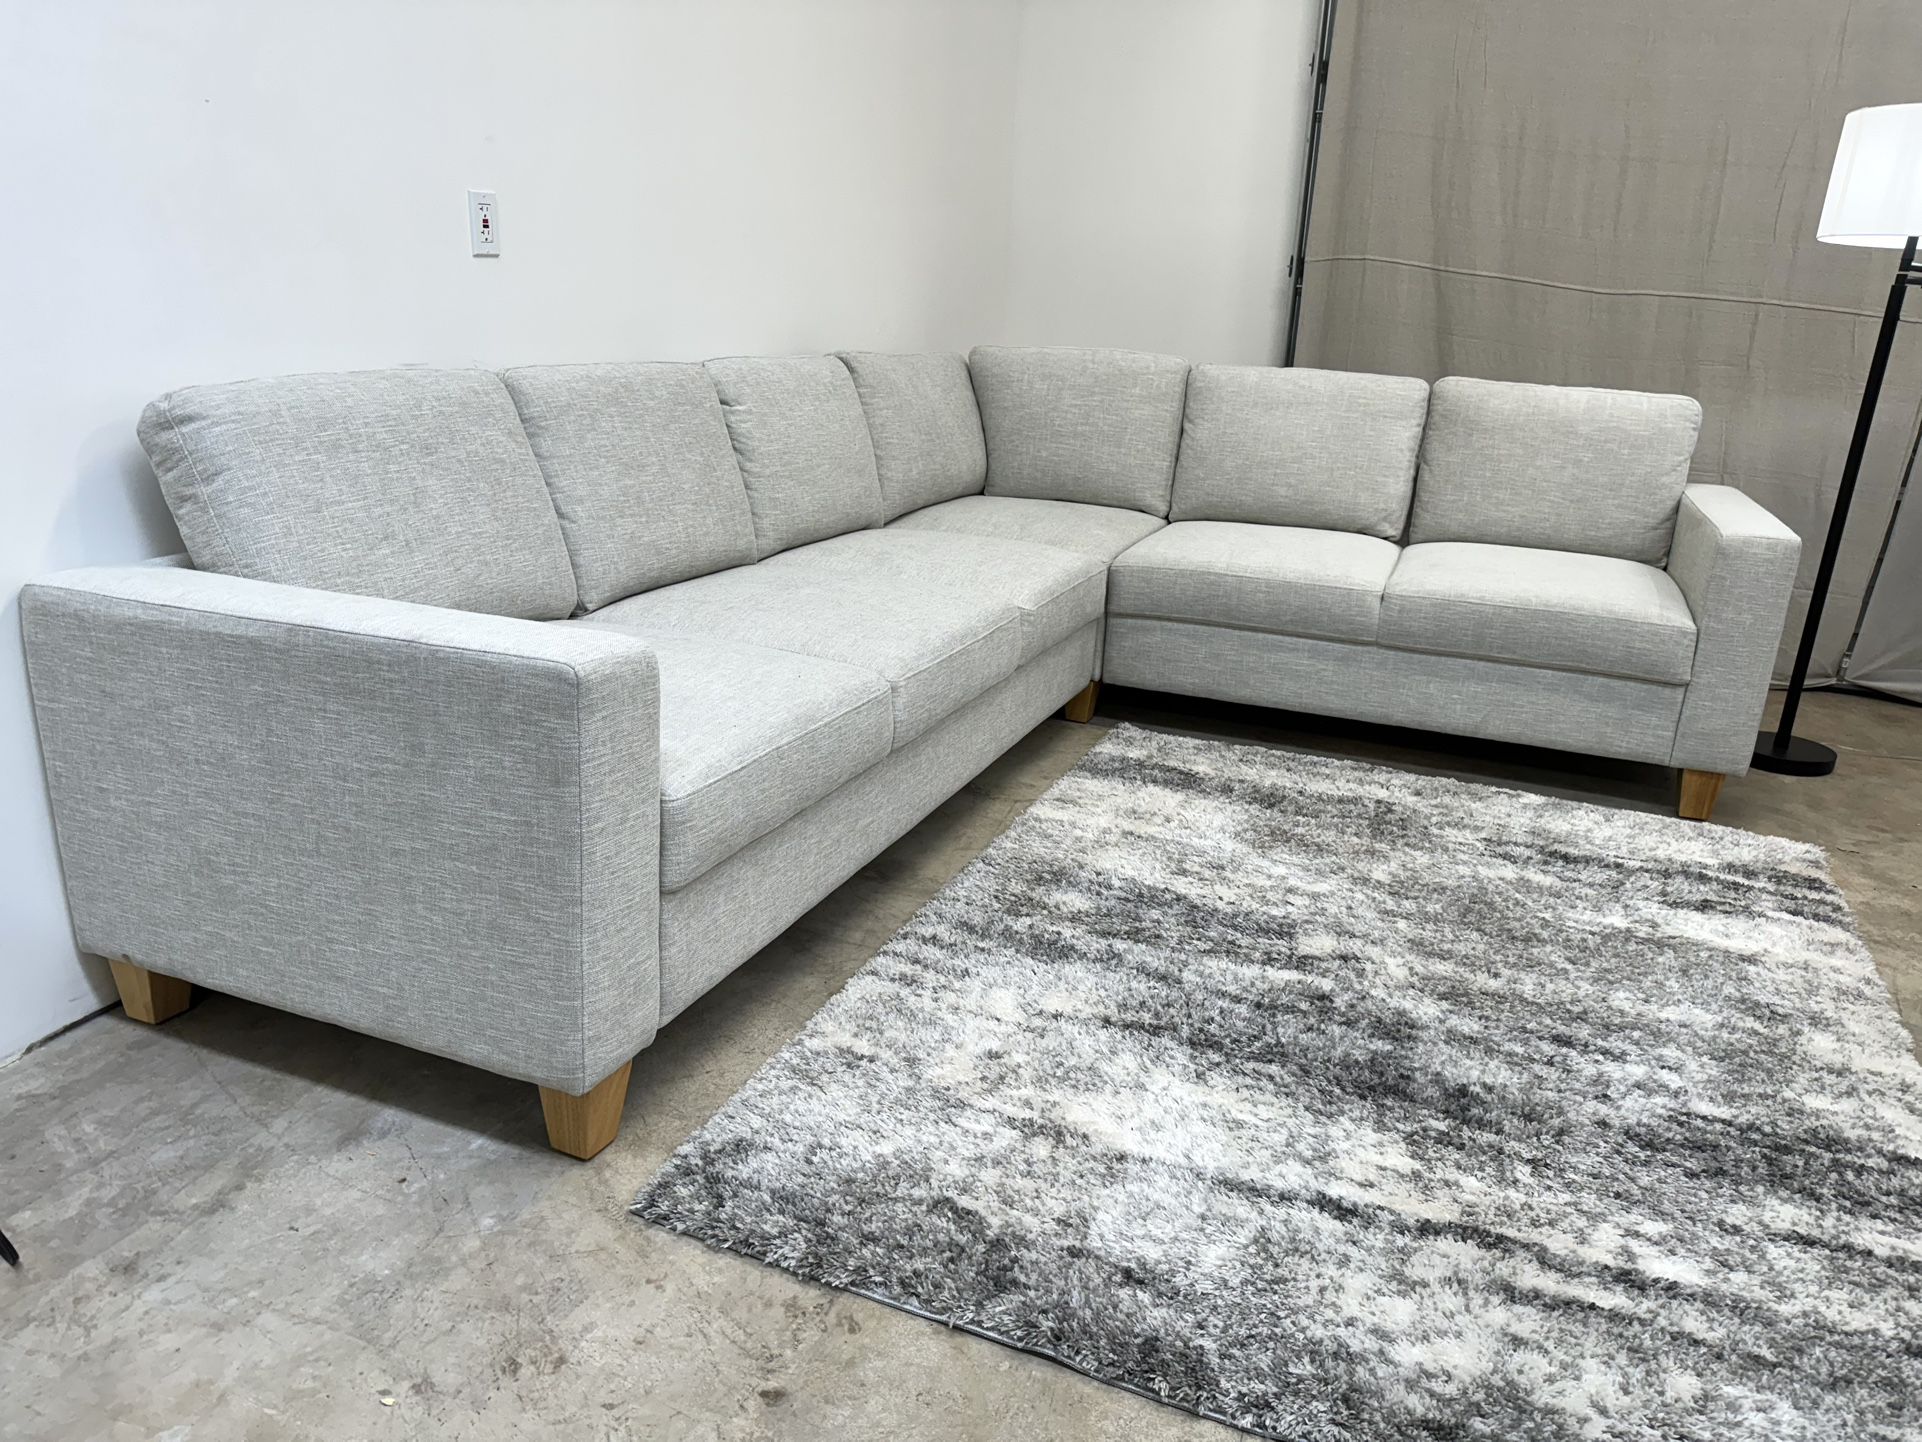 New Thomasville Convertible Sleeper Sectional